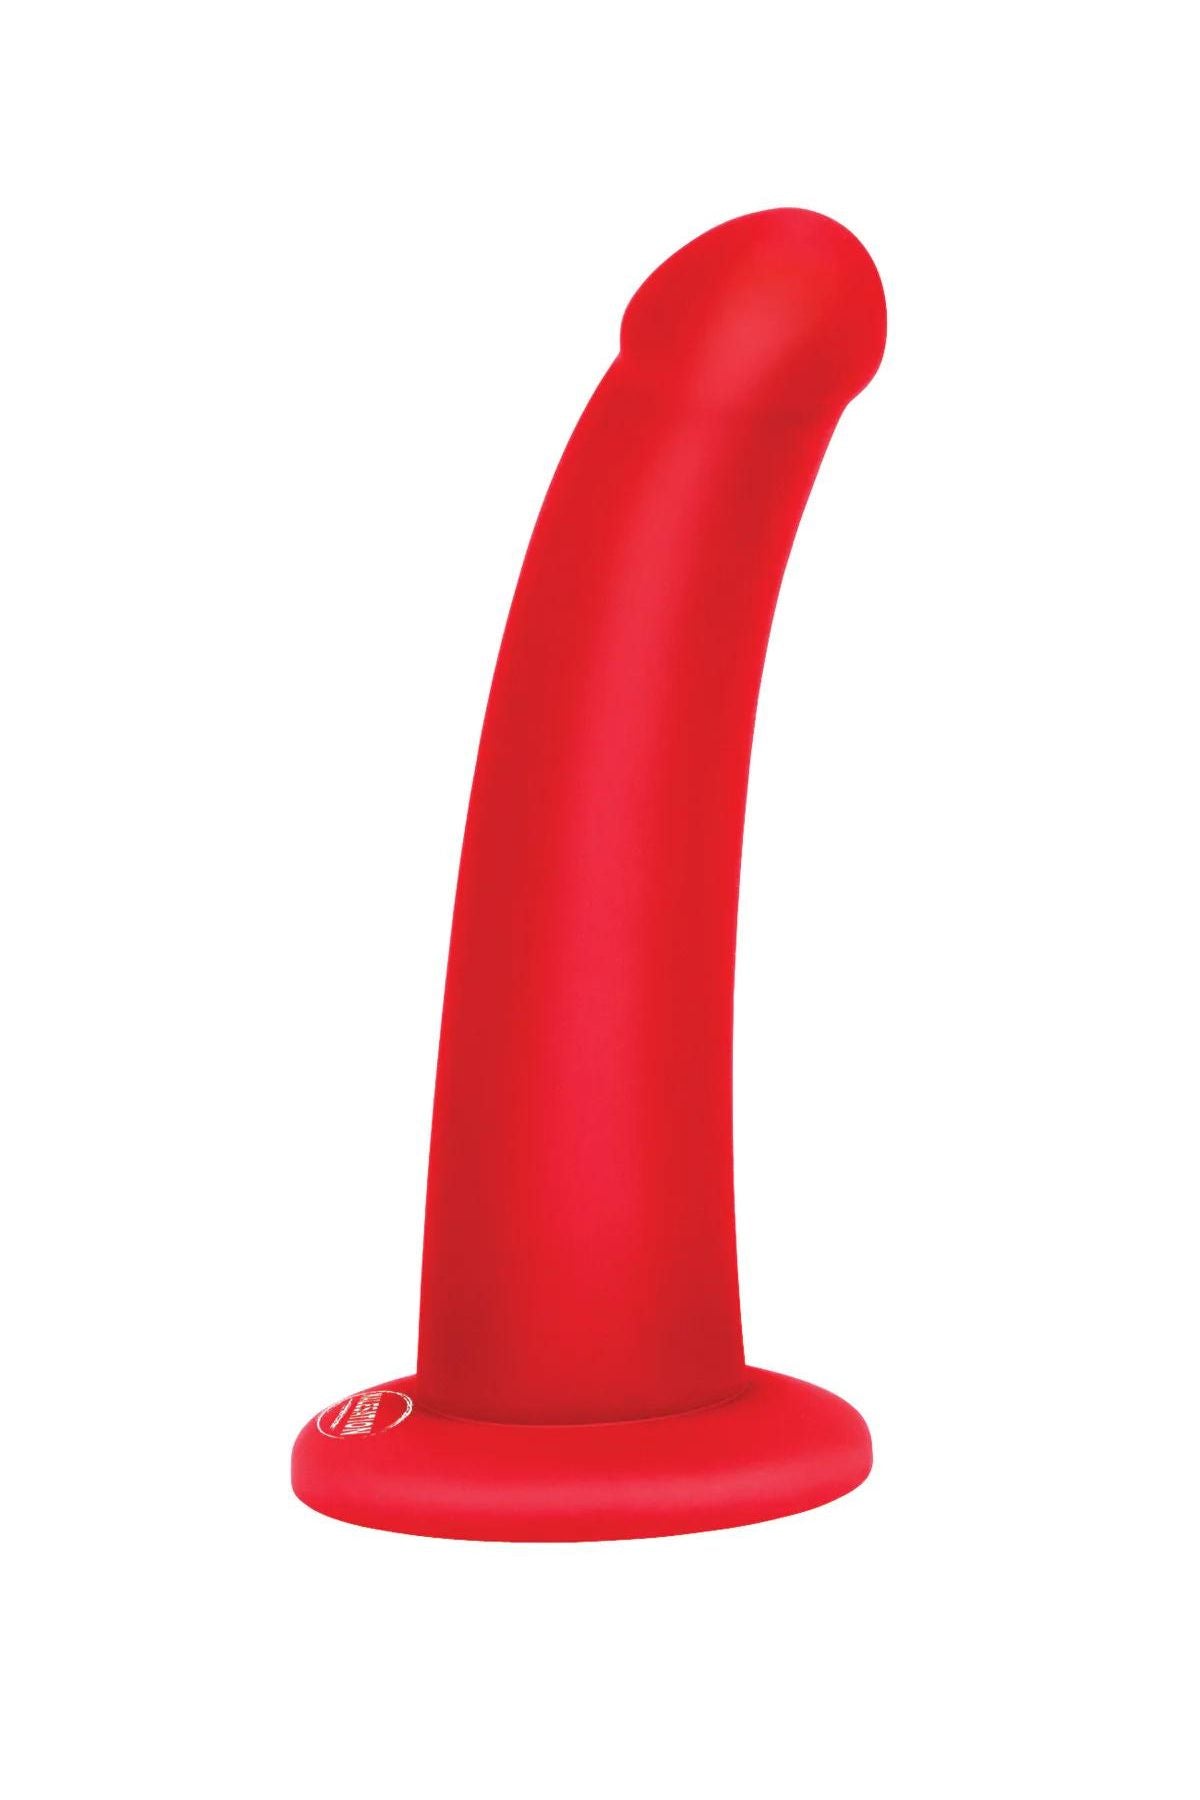 Willy | Suction Cup Dildo